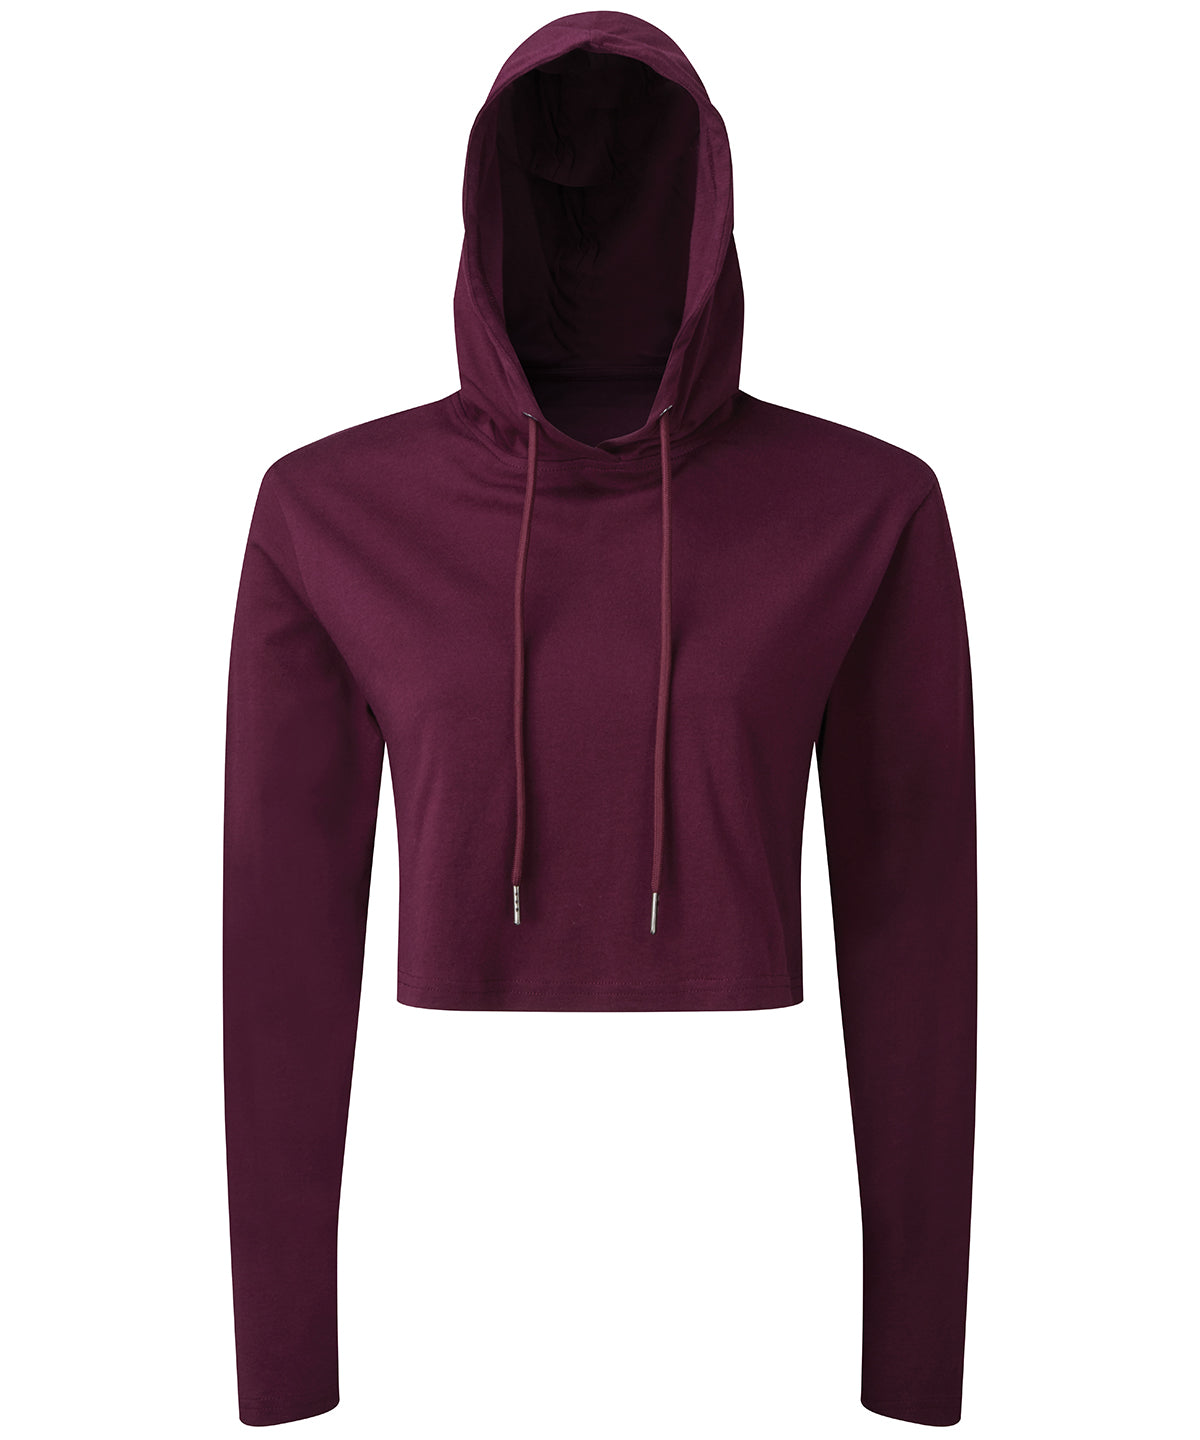 Mulberry - Women's TriDri® cropped hooded long sleeve t-shirt Hoodies TriDri® Activewear & Performance, Back to the Gym, Exclusives, Gymwear, Lounge Sets, Must Haves, Raladeal - Recently Added, Rebrandable, Sports & Leisure, T-Shirts & Vests, Tracksuits, Trending, Trending Loungewear Schoolwear Centres